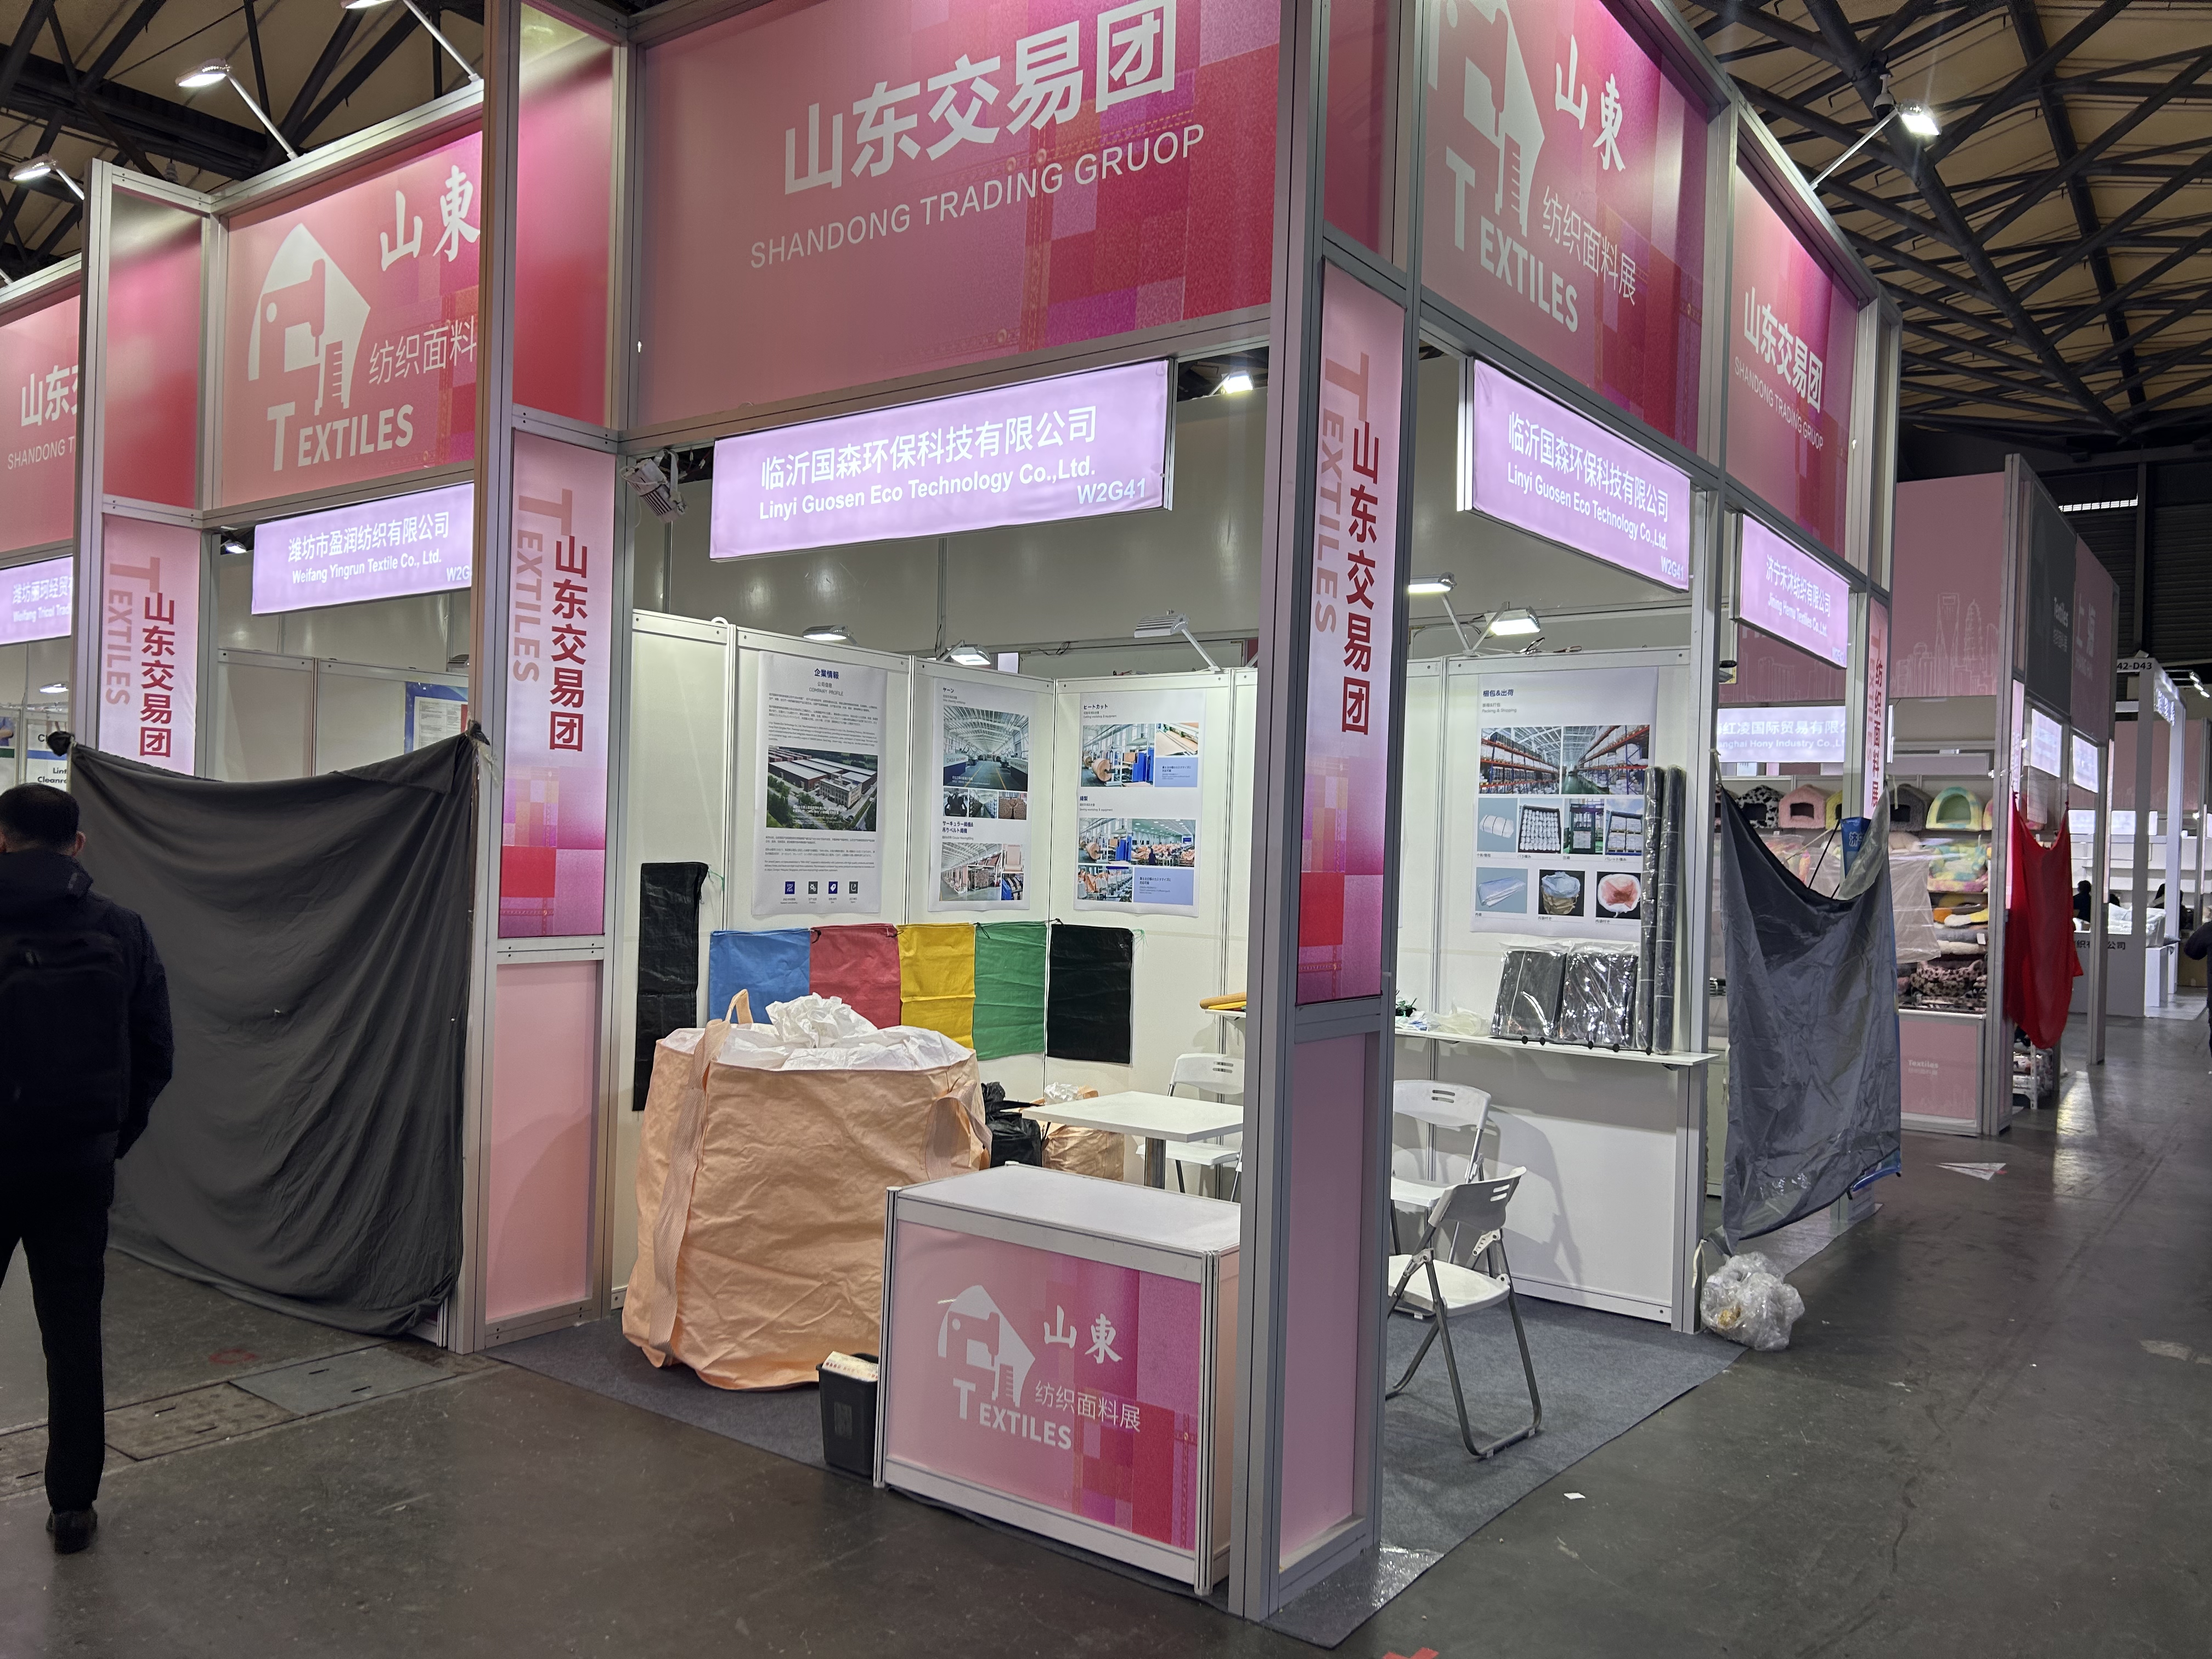 Welcome to our booth at Shanghai East China Fair exhibition, booth number W2G41